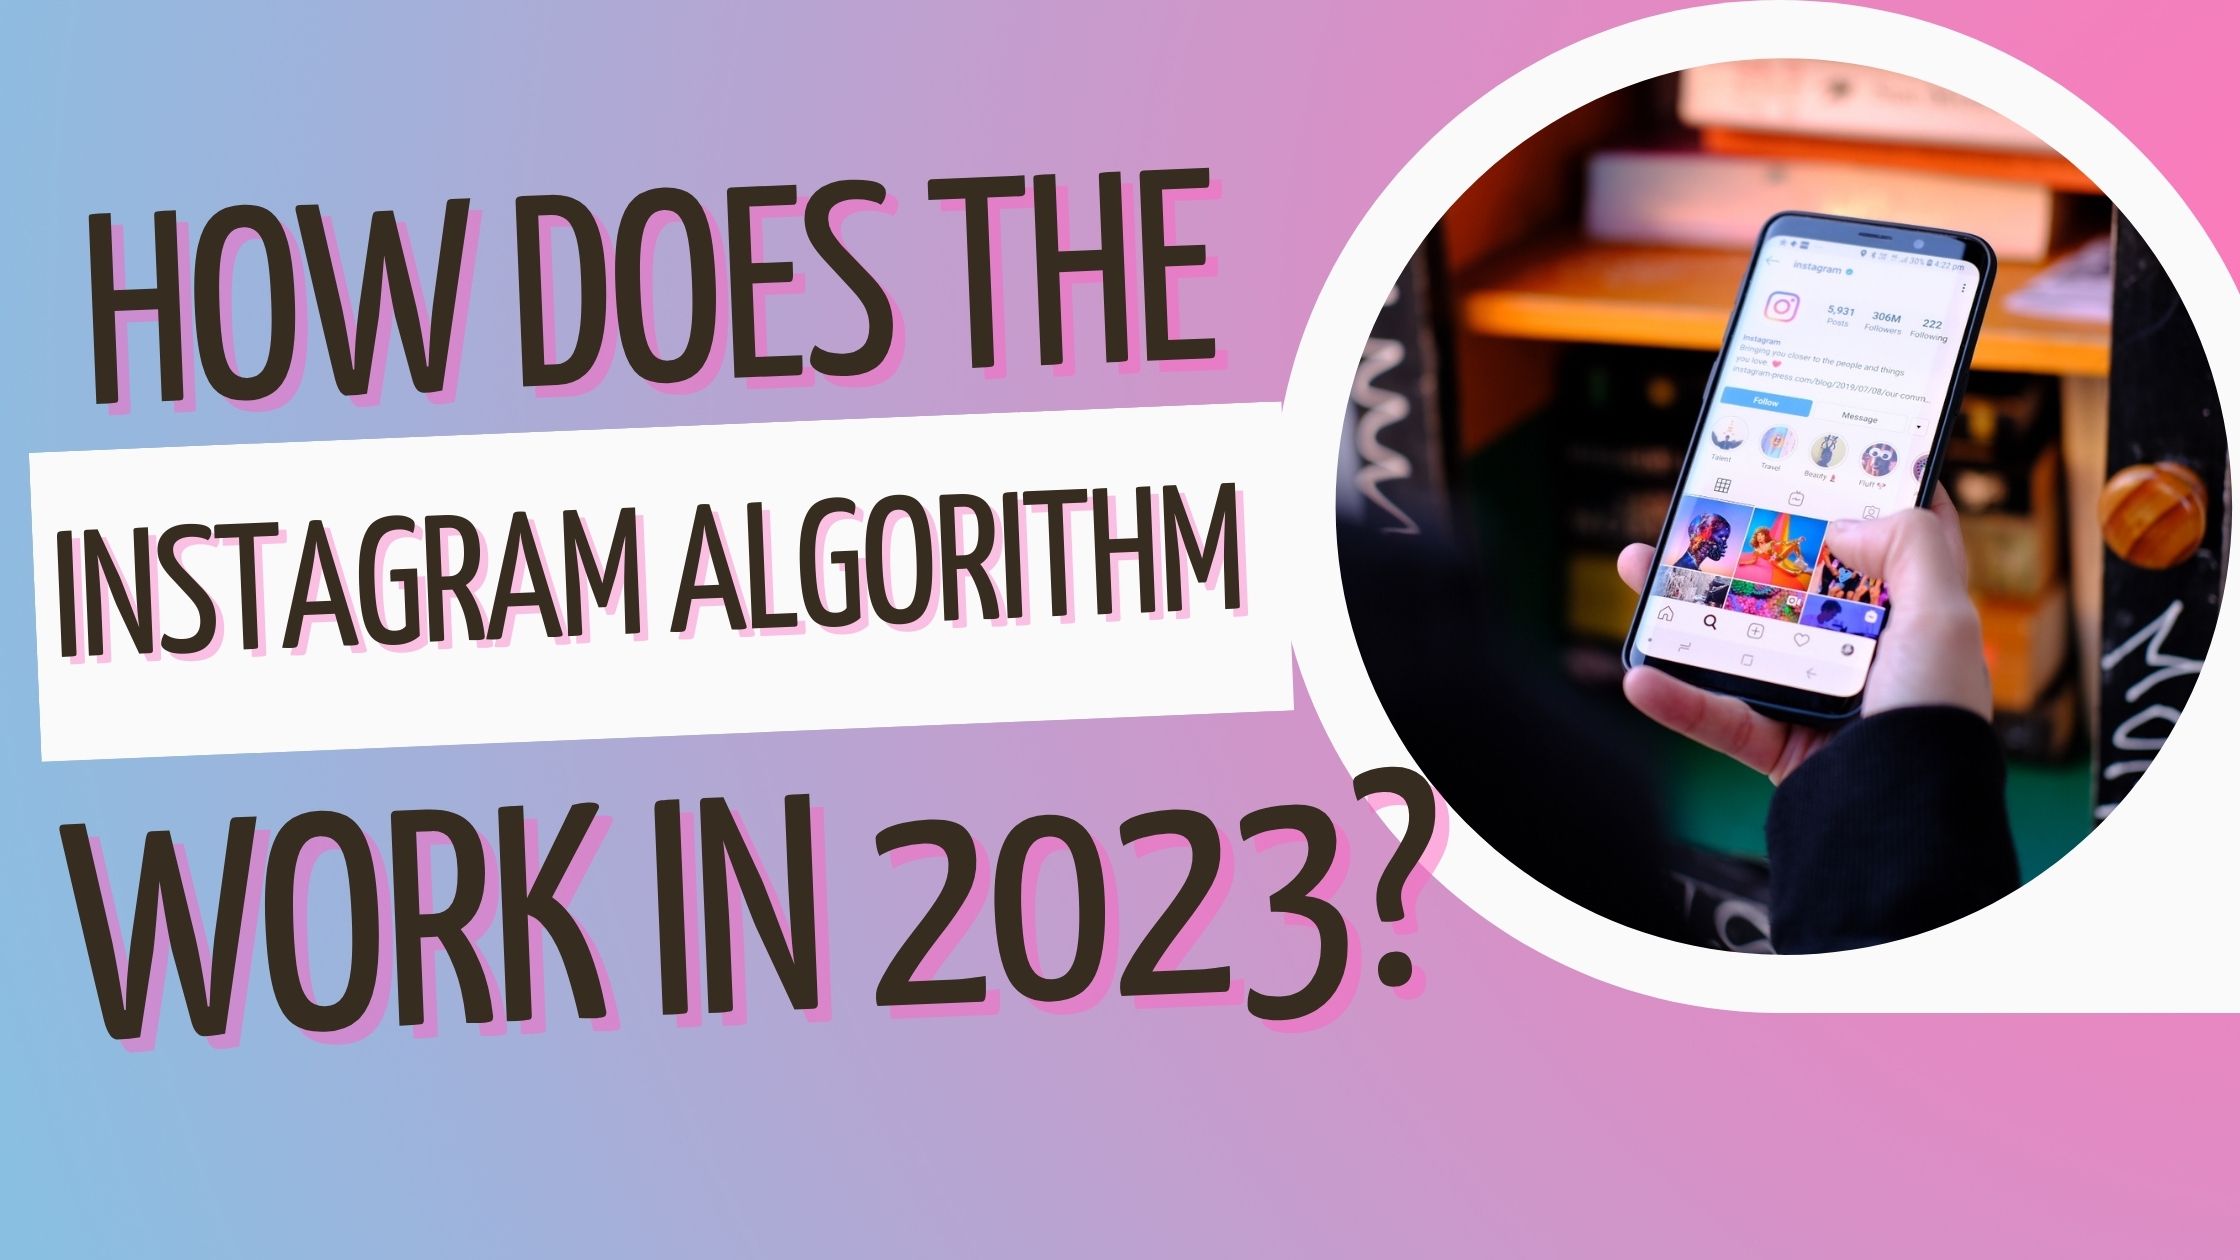 How does the Instagram Algorithm work in 2023?